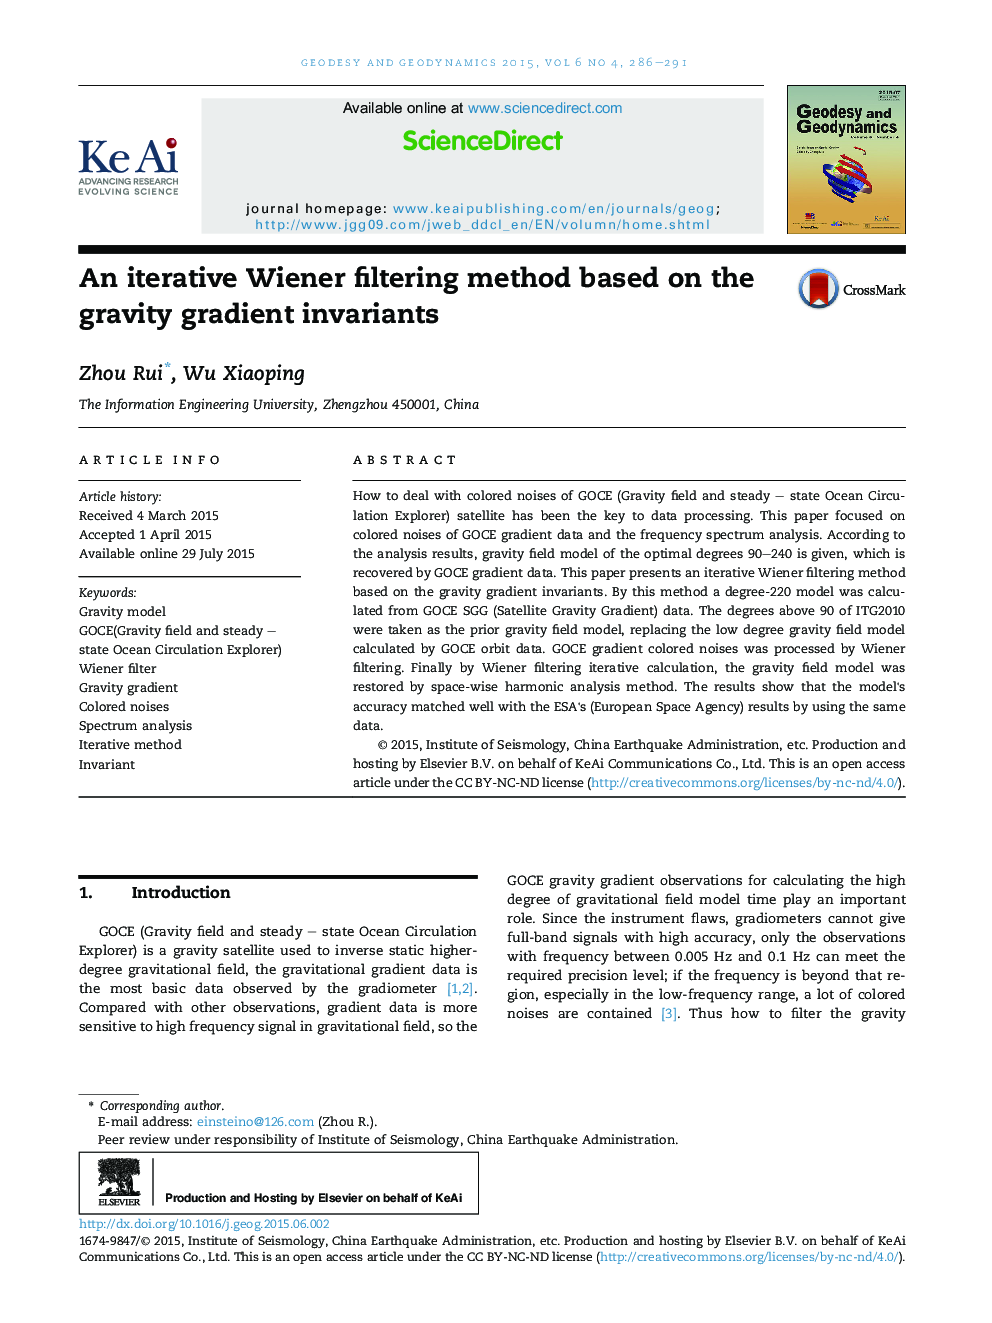 An iterative Wiener filtering method based on the gravity gradient invariants 